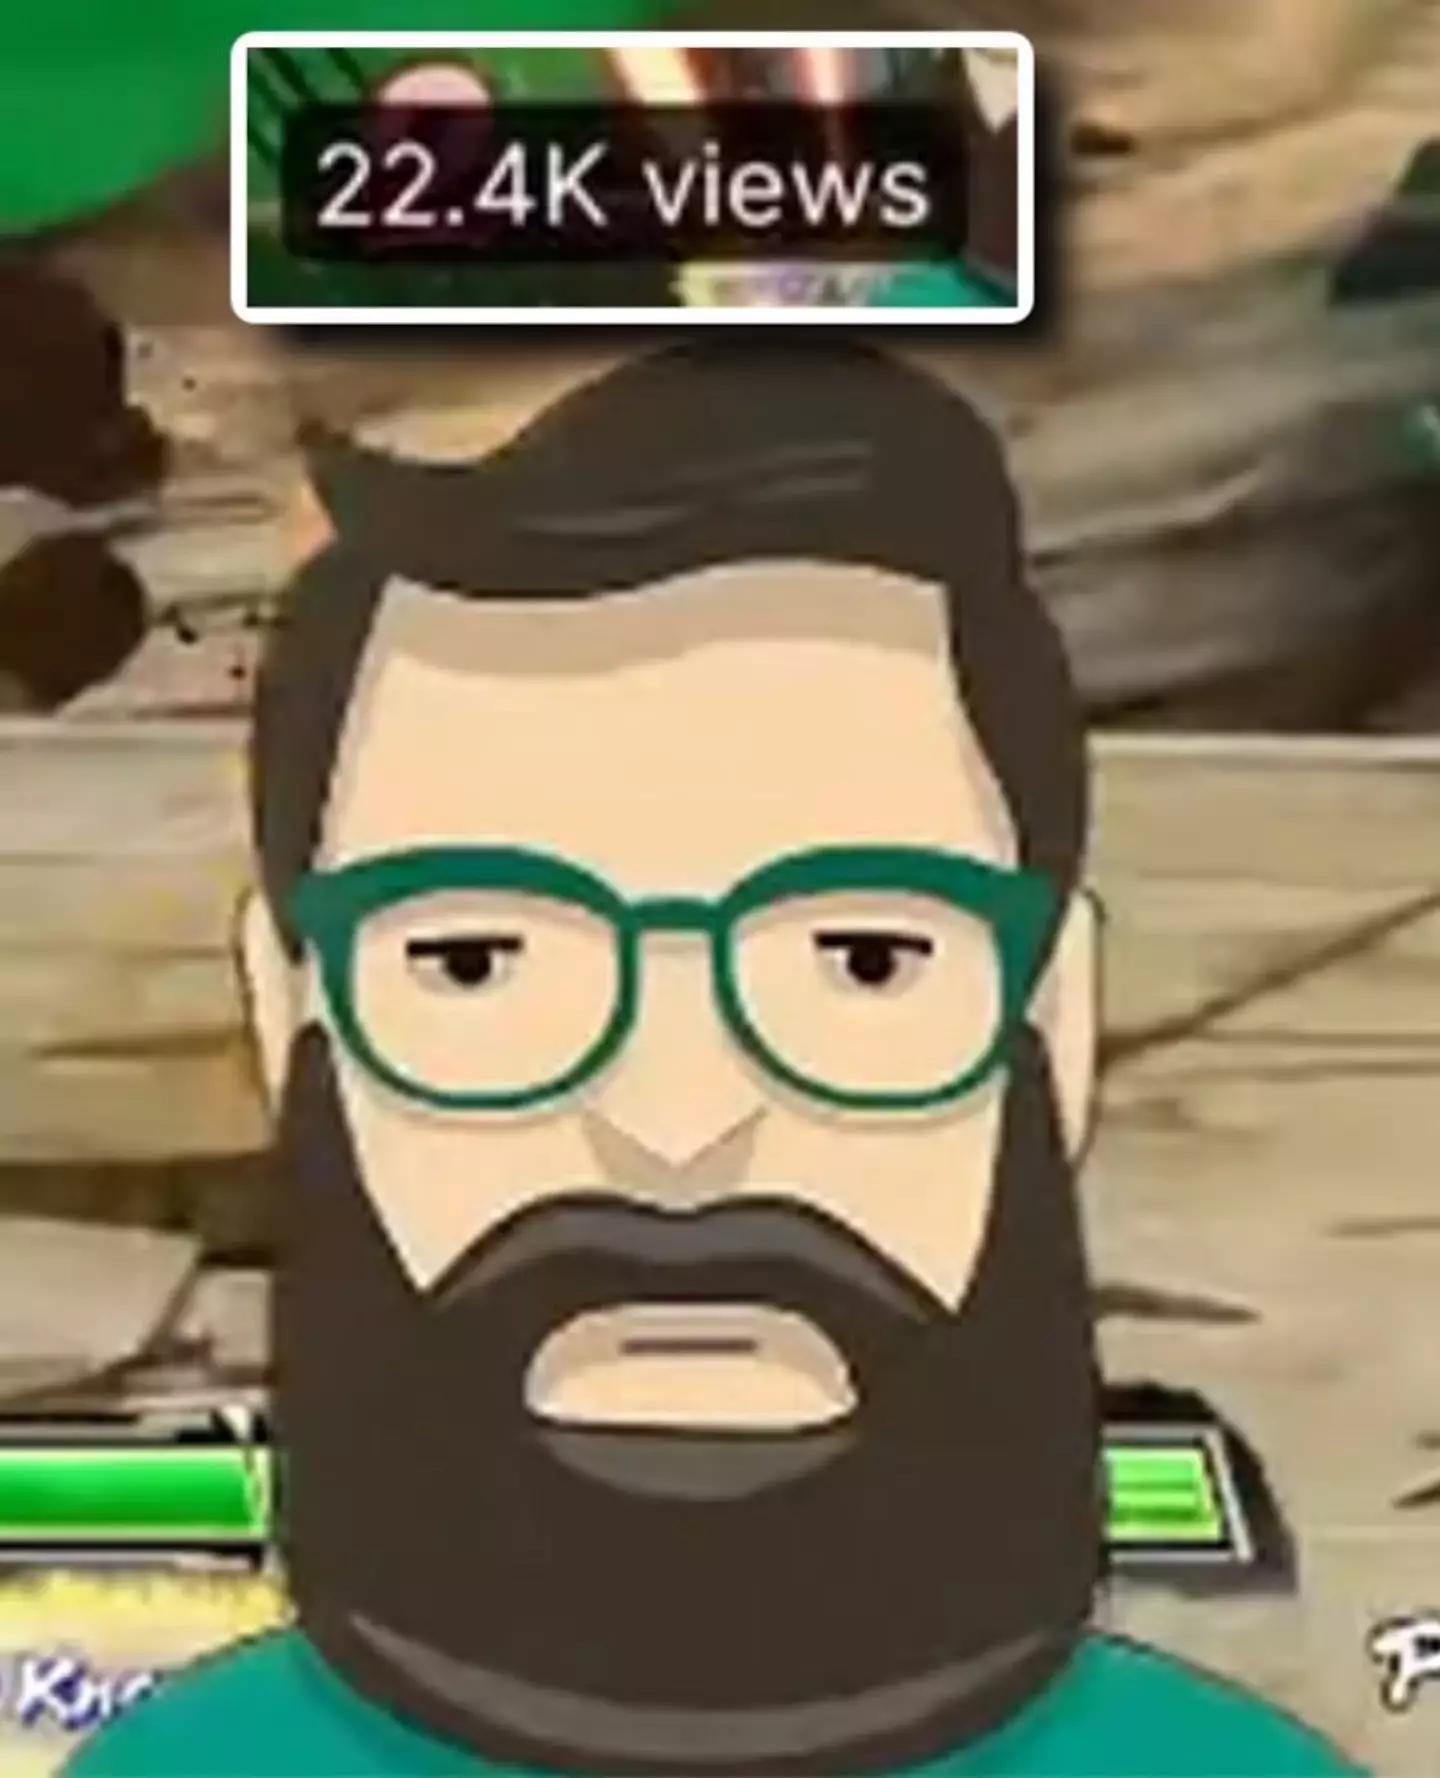 The avatar that Zach used.